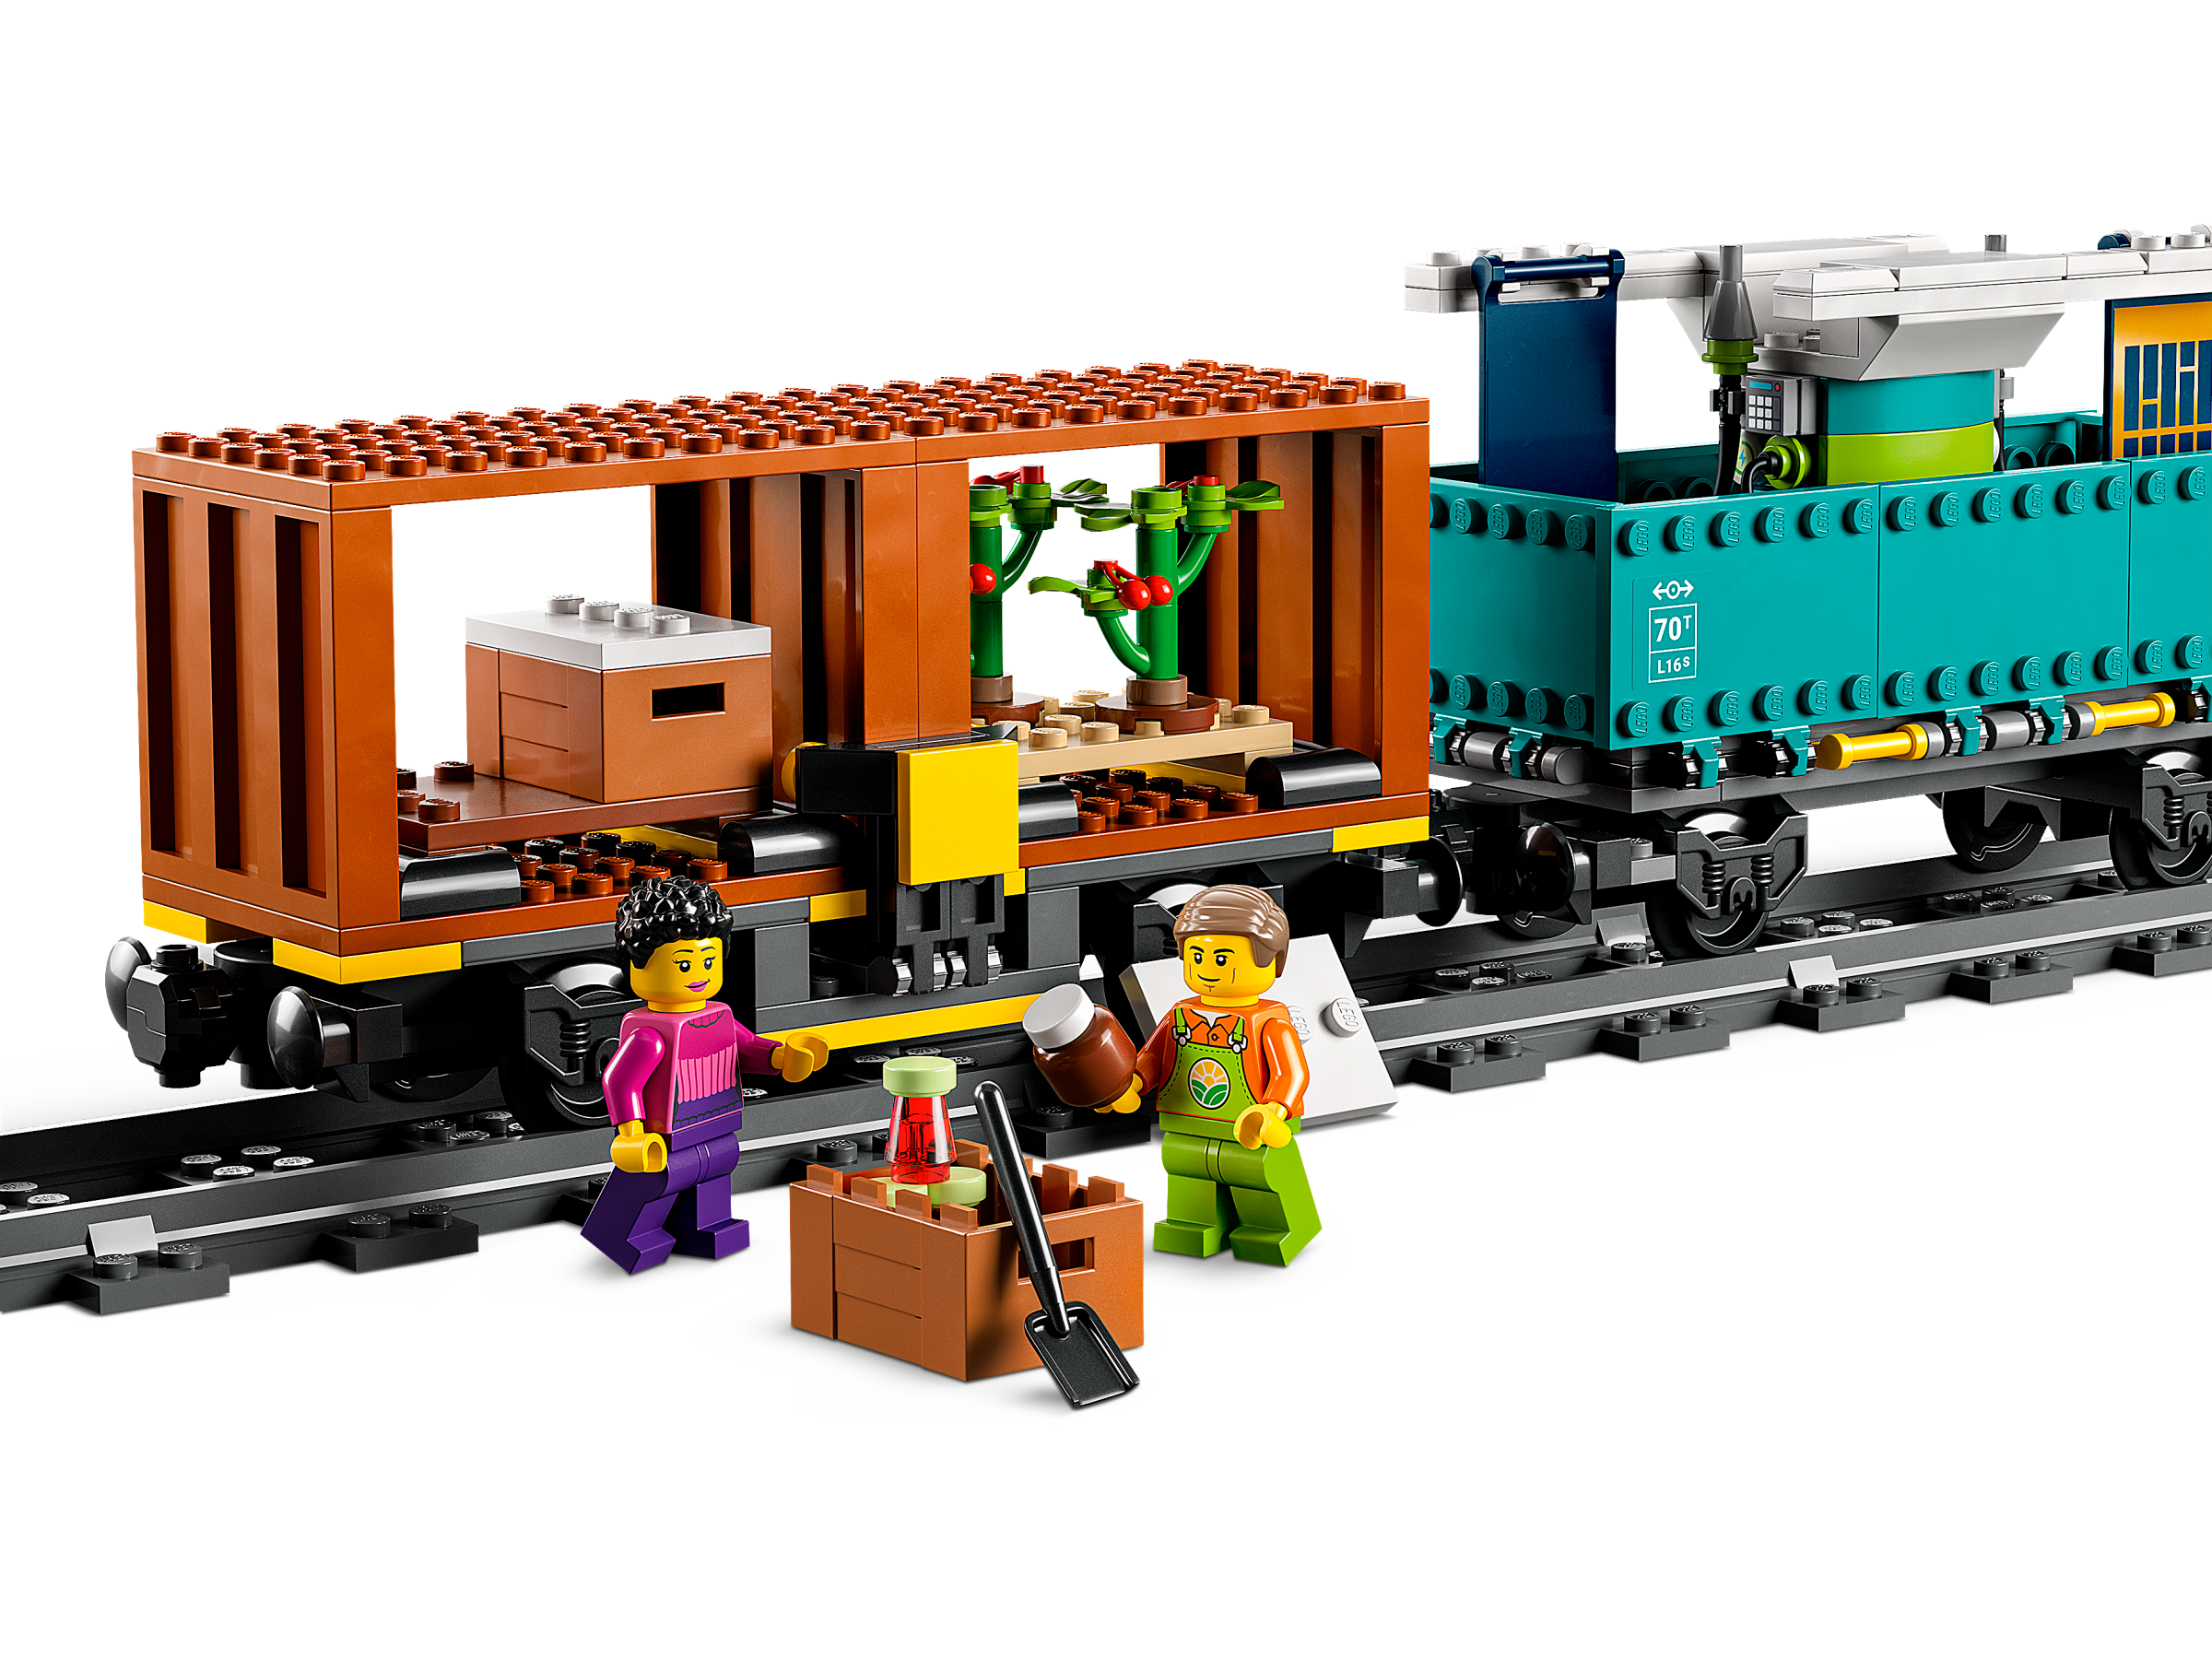 LEGO 60336 Freight Train images on Building Instructions app